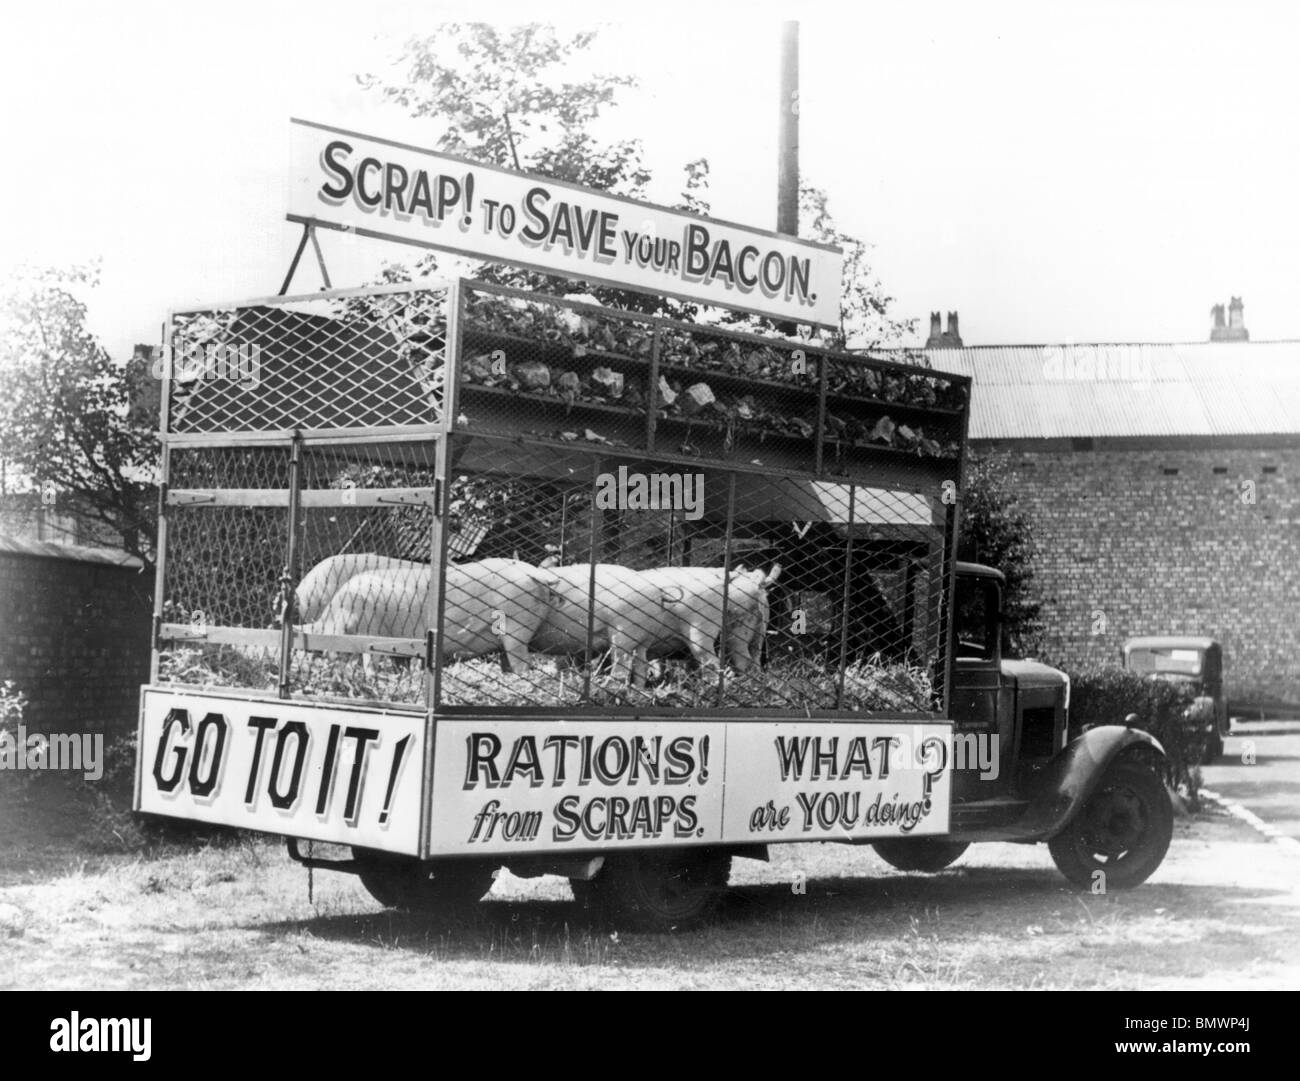 Morris salvage lorry in Liverpool 1941promoting recycling of scraps during World war 2 rationing. Stock Photo